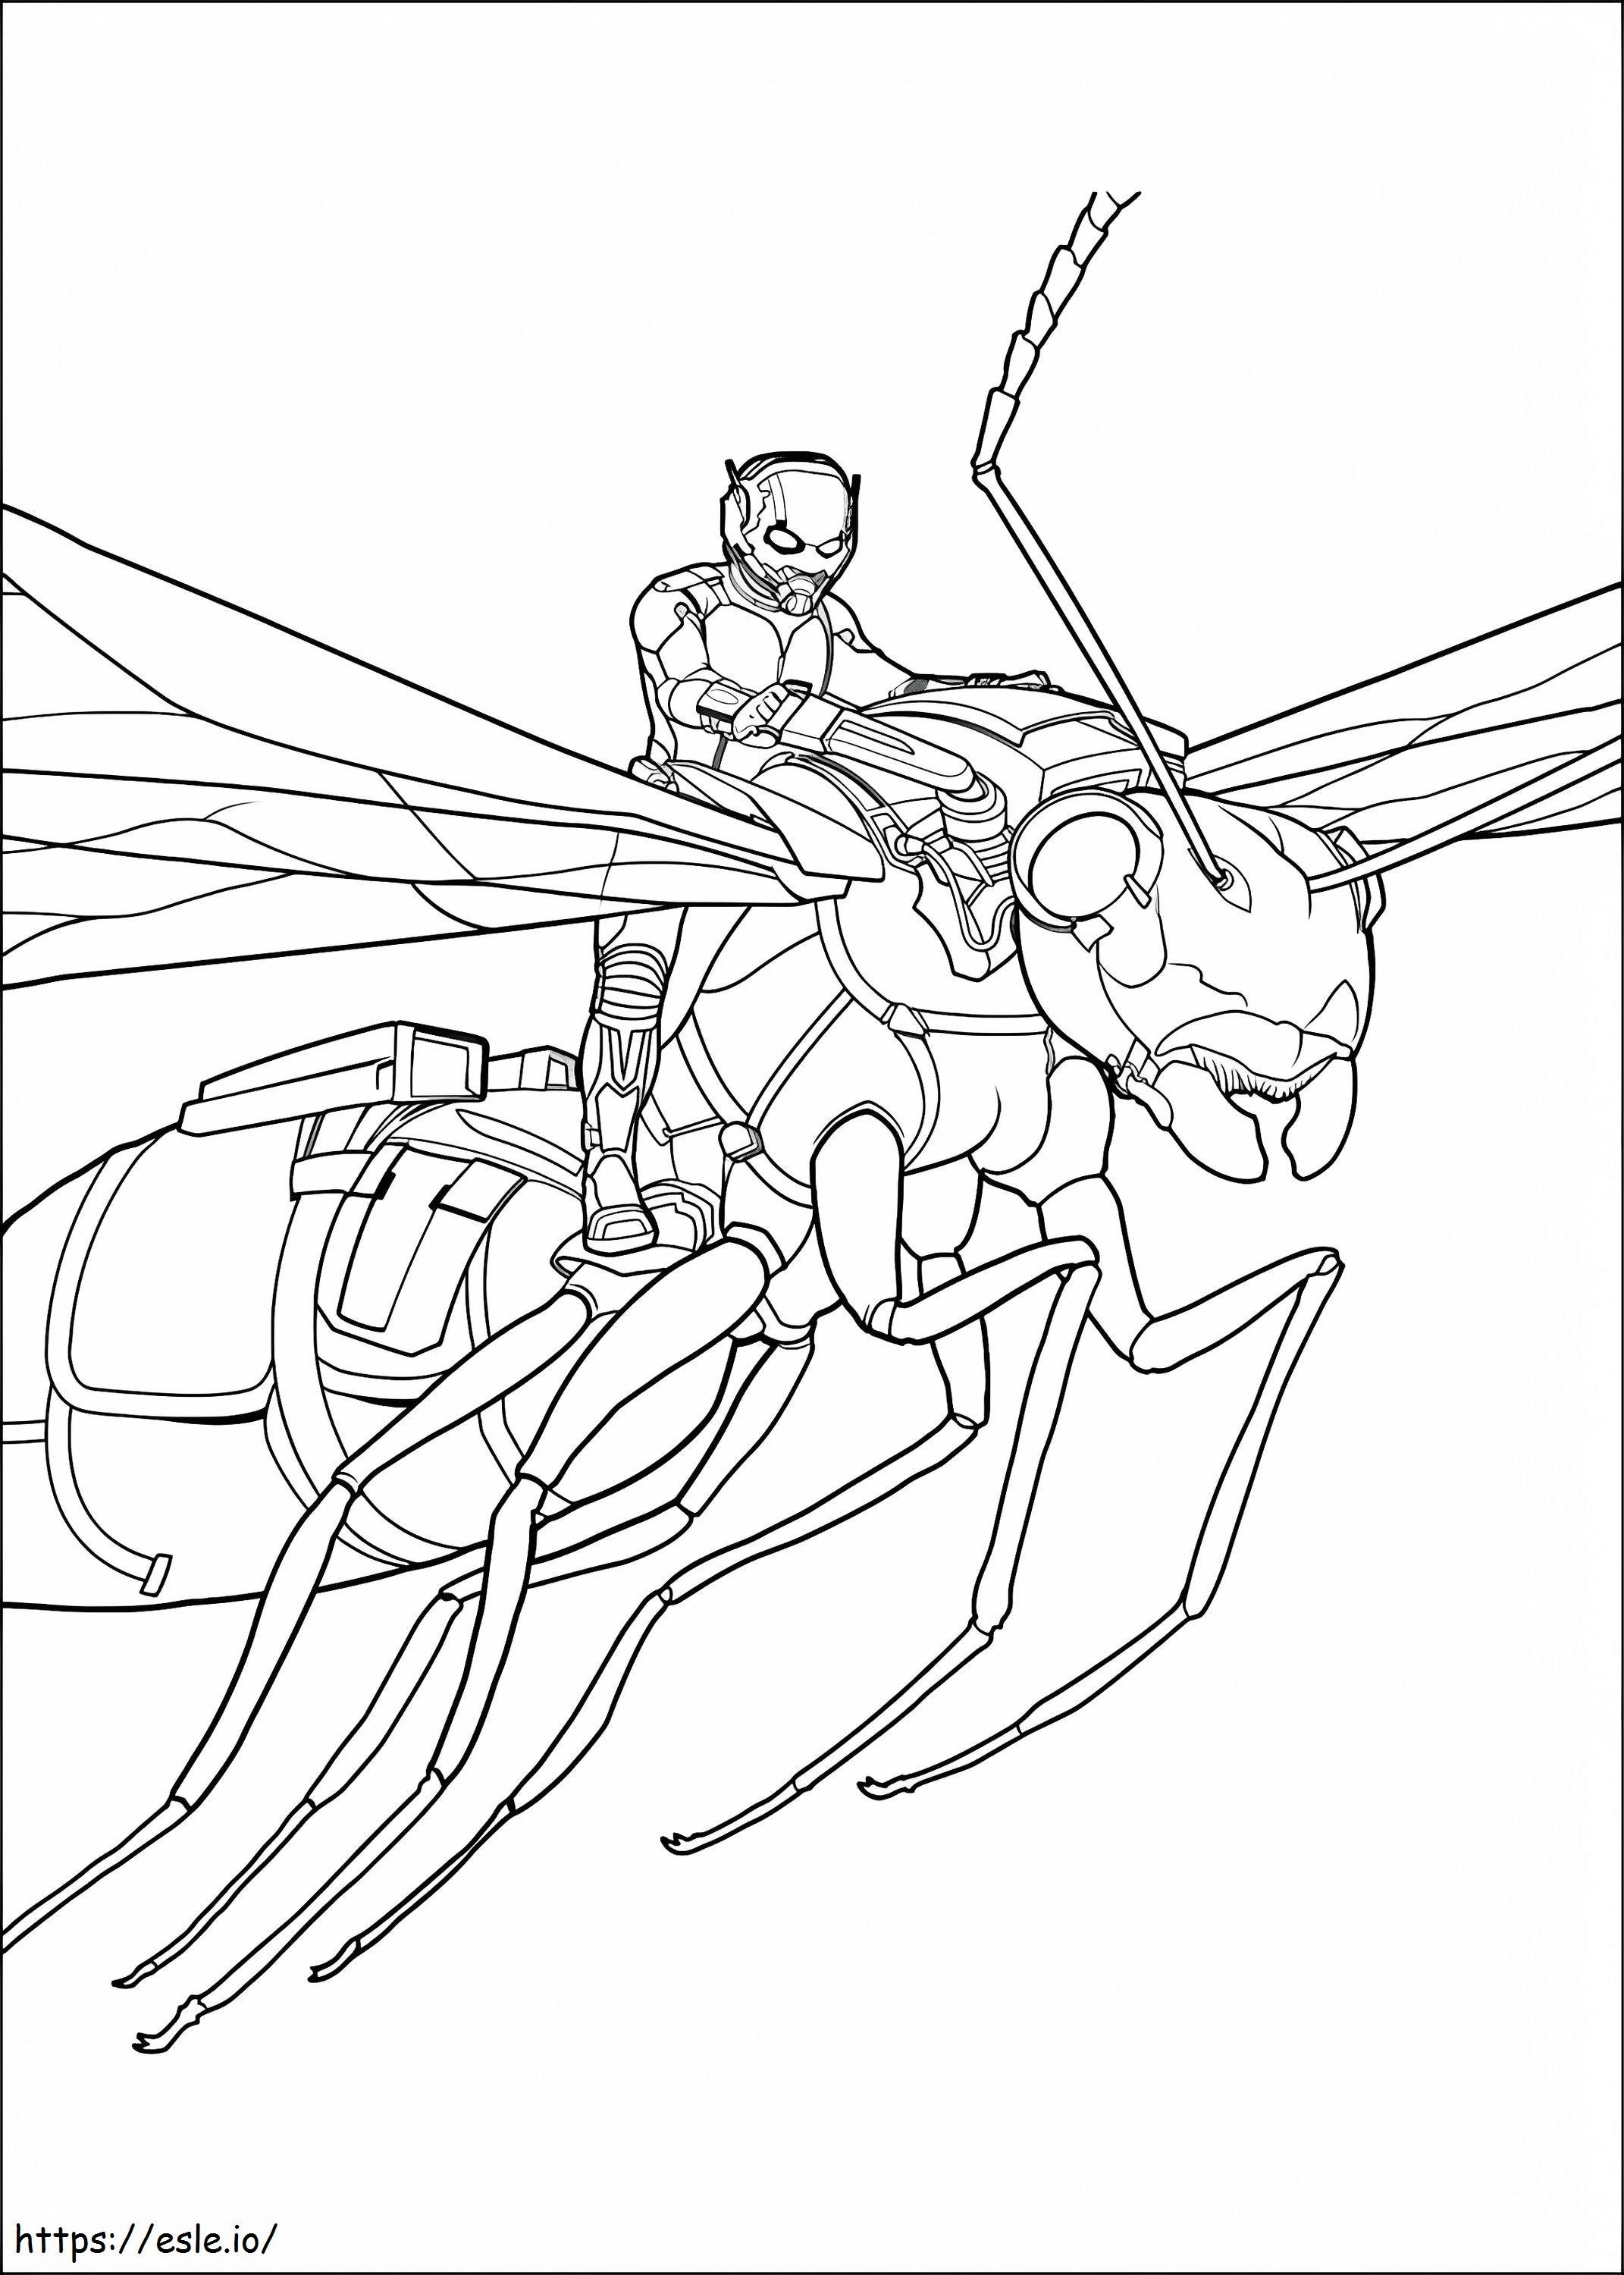  Ant Man On Flying Ant A4 para colorir